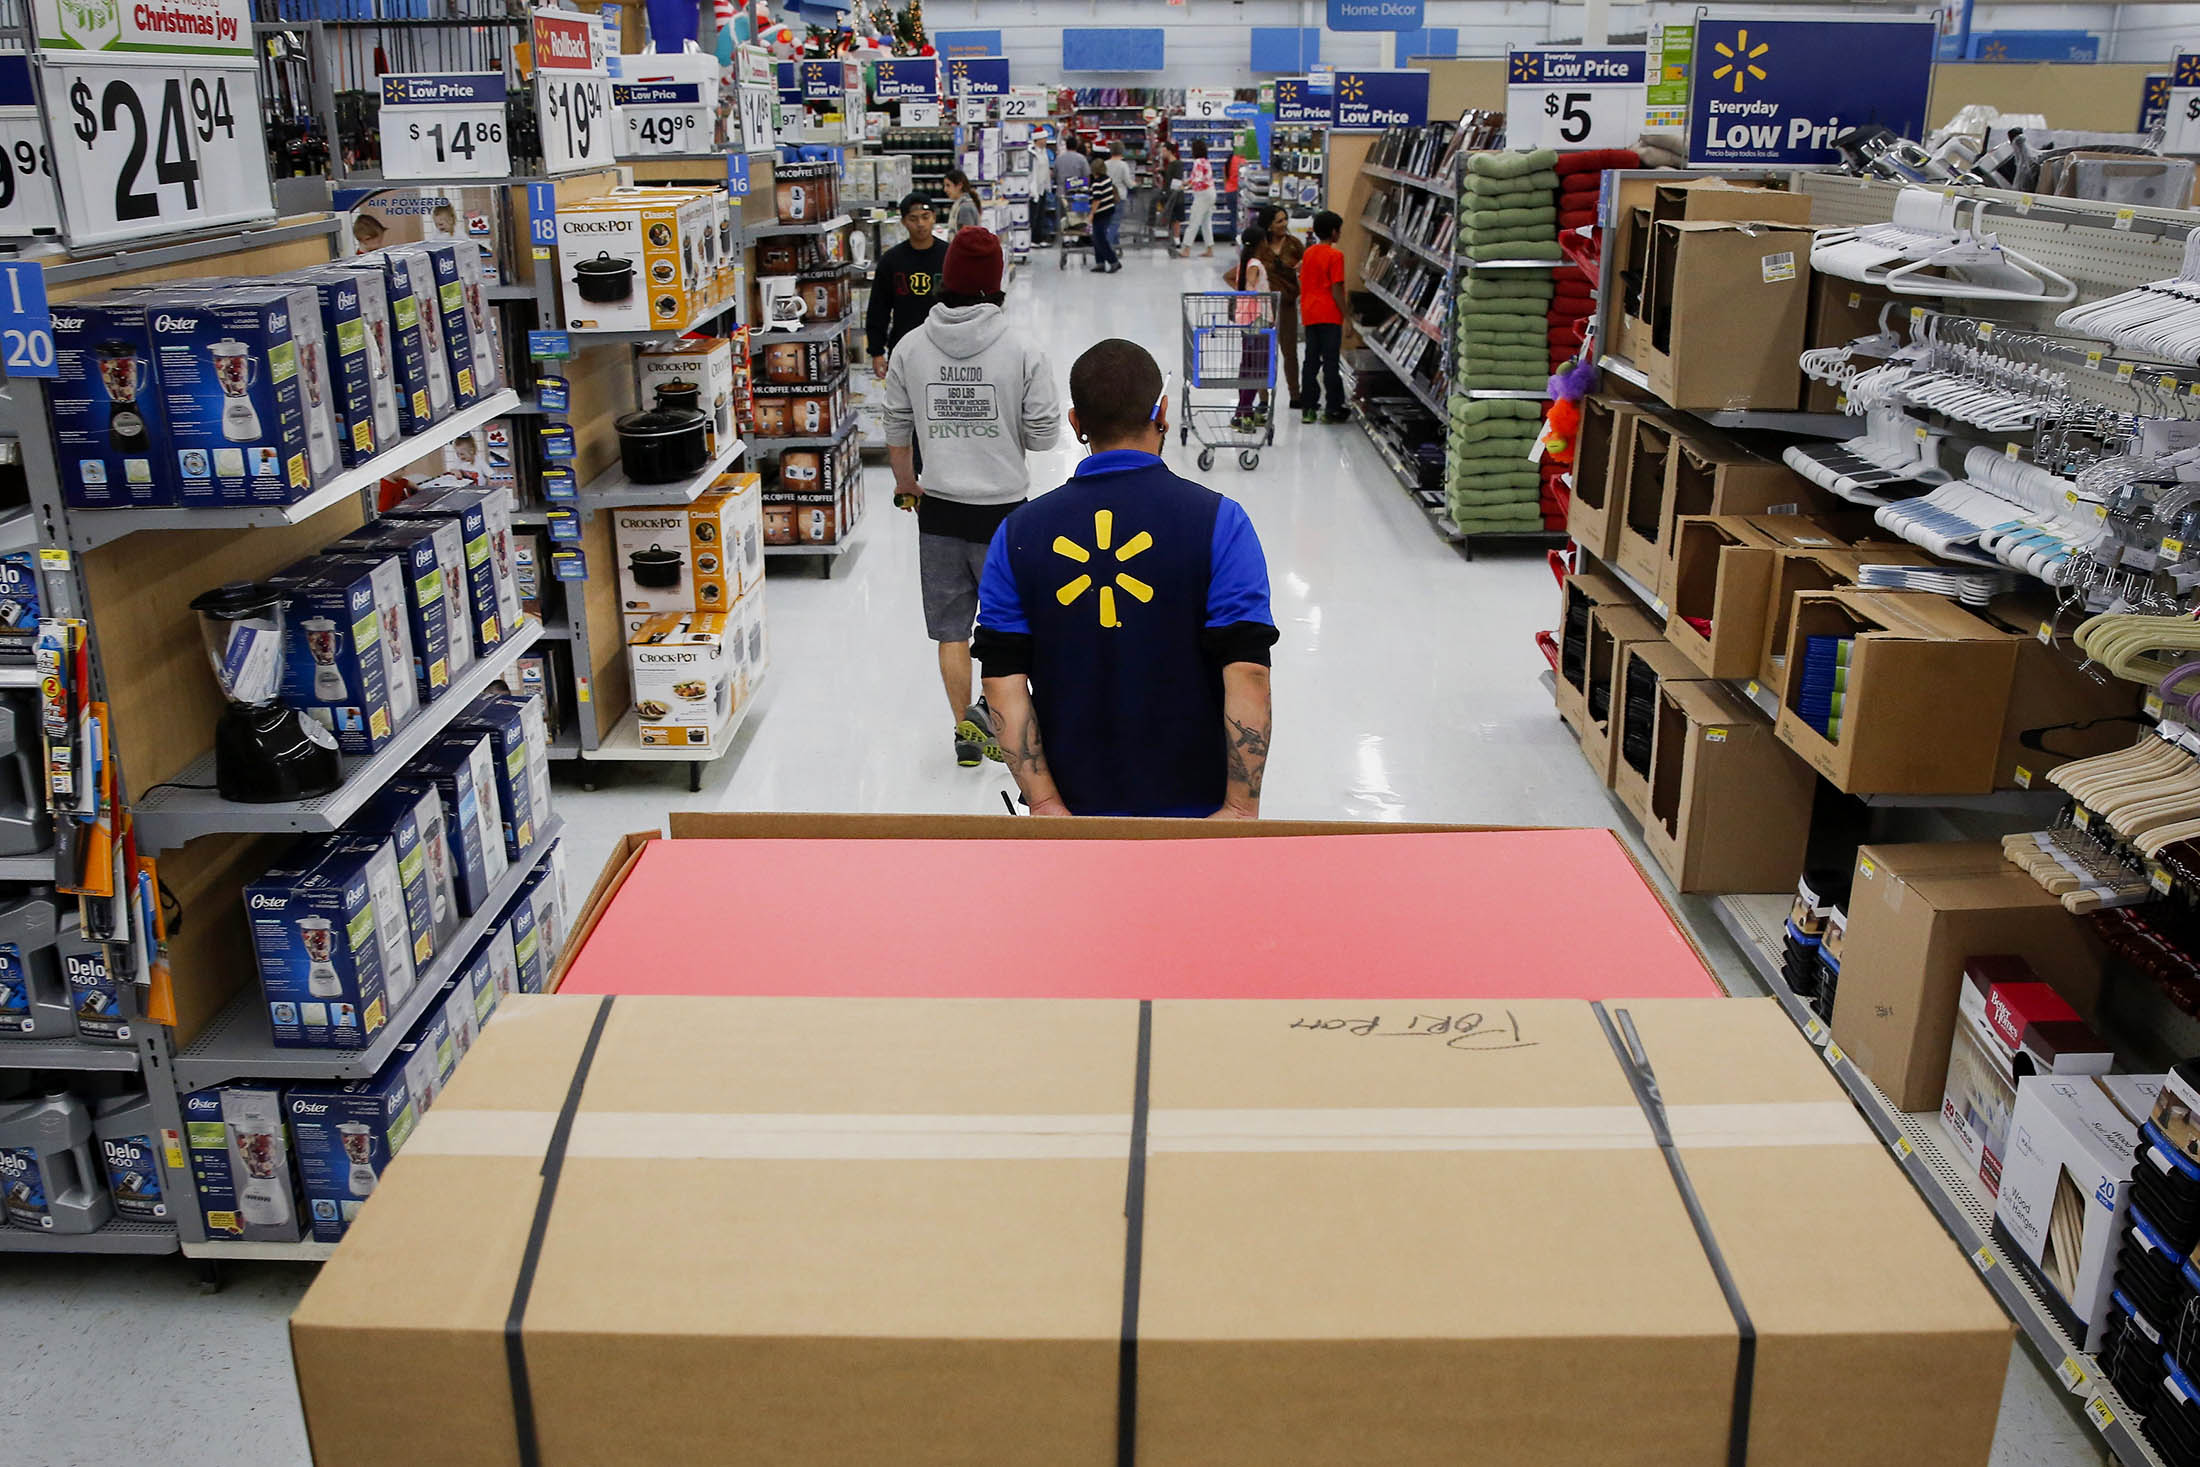 A Wal-Mart employee readies a merchandise at a store in Los Angeles.
